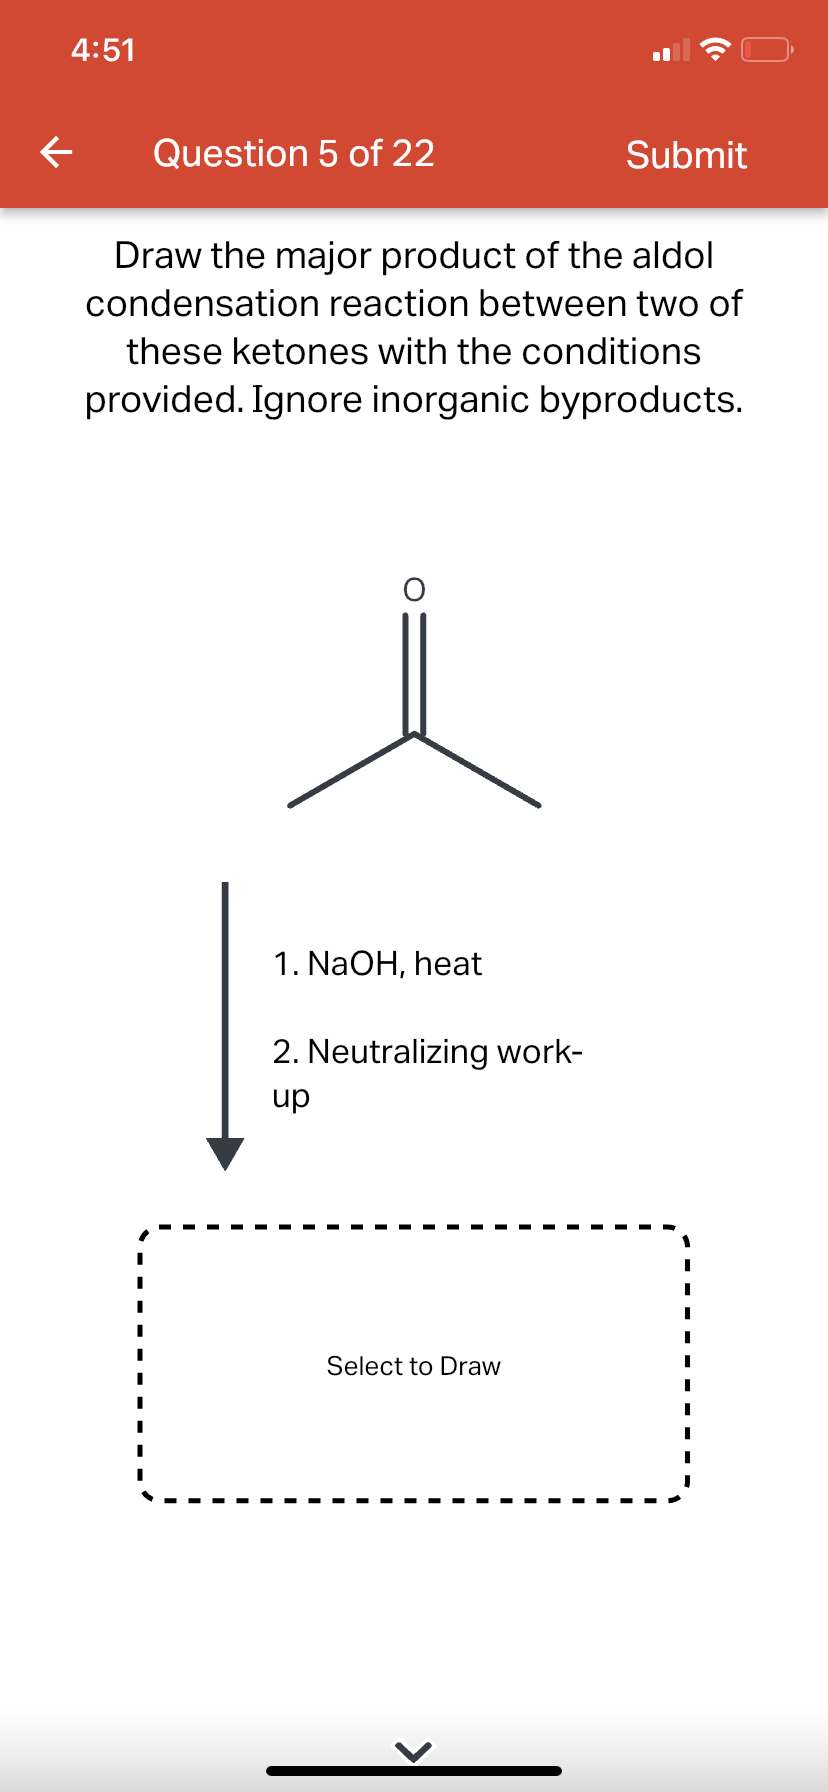 4:51
←
Question 5 of 22
Draw the major product of the aldol
condensation reaction between two of
these ketones with the conditions
provided. Ignore inorganic byproducts.
1. NaOH, heat
2. Neutralizing work-
up
Submit
Select to Draw